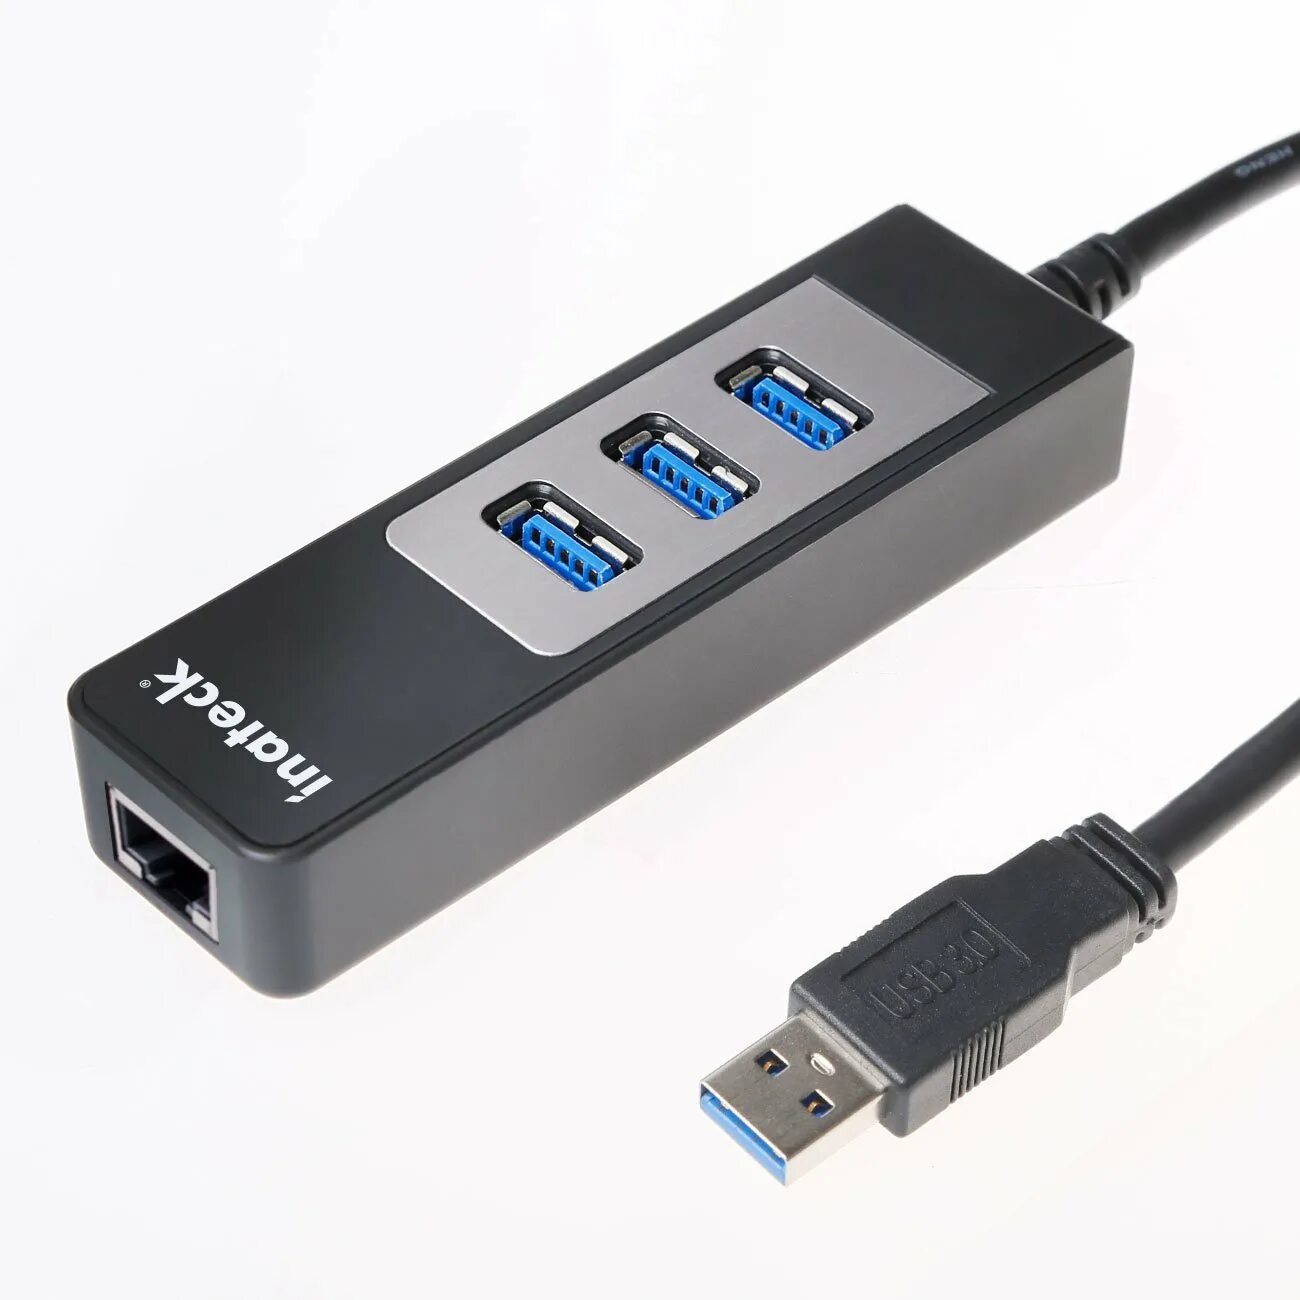 USB Ethernet Adapter Switch. Wired Internet lan Adapter for Switch. USB Ethernet тройник.